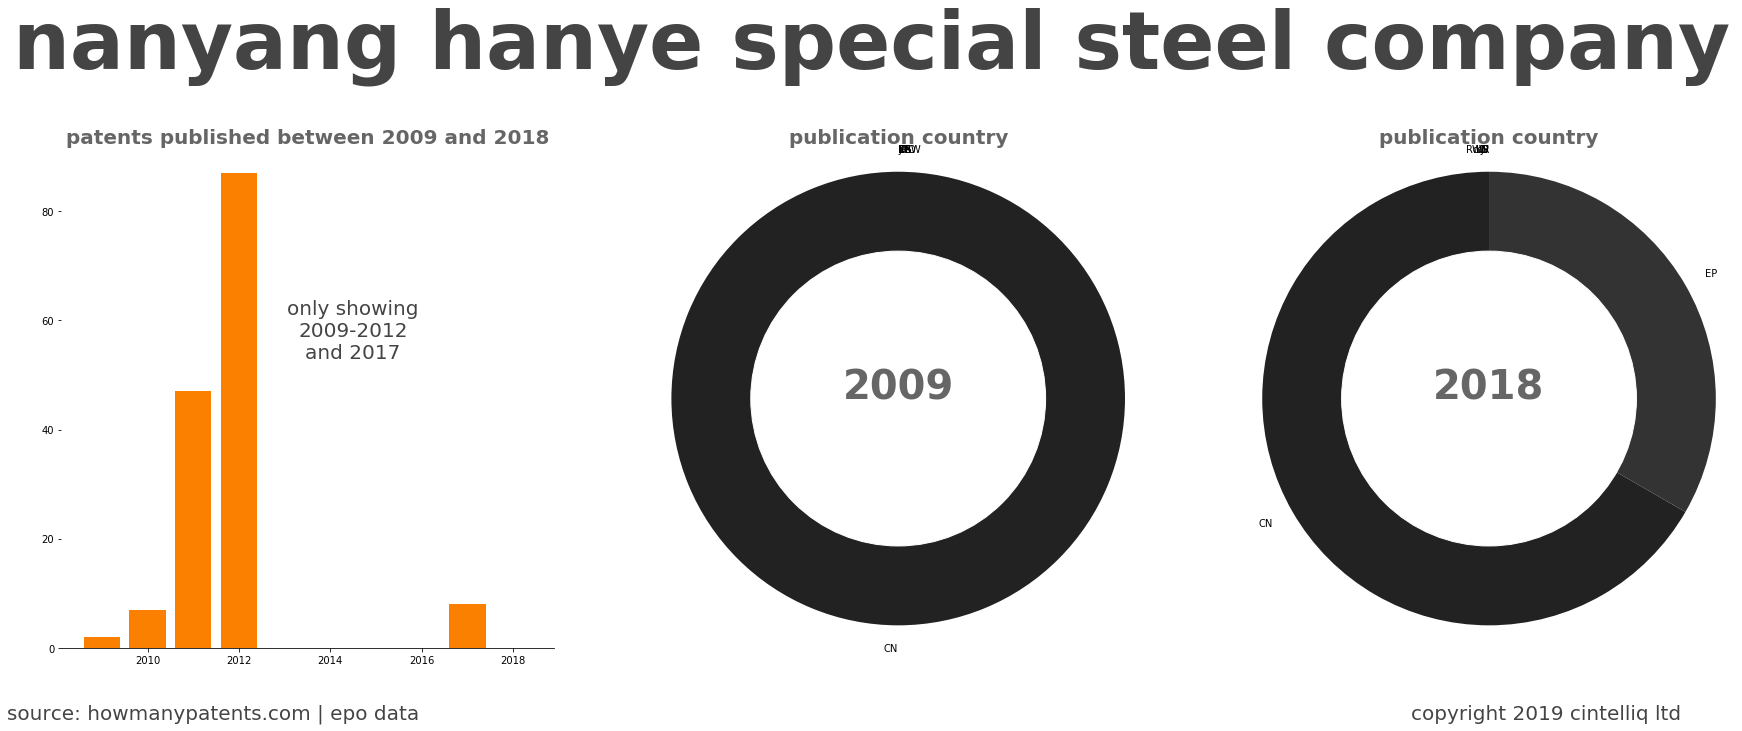 summary of patents for Nanyang Hanye Special Steel Company